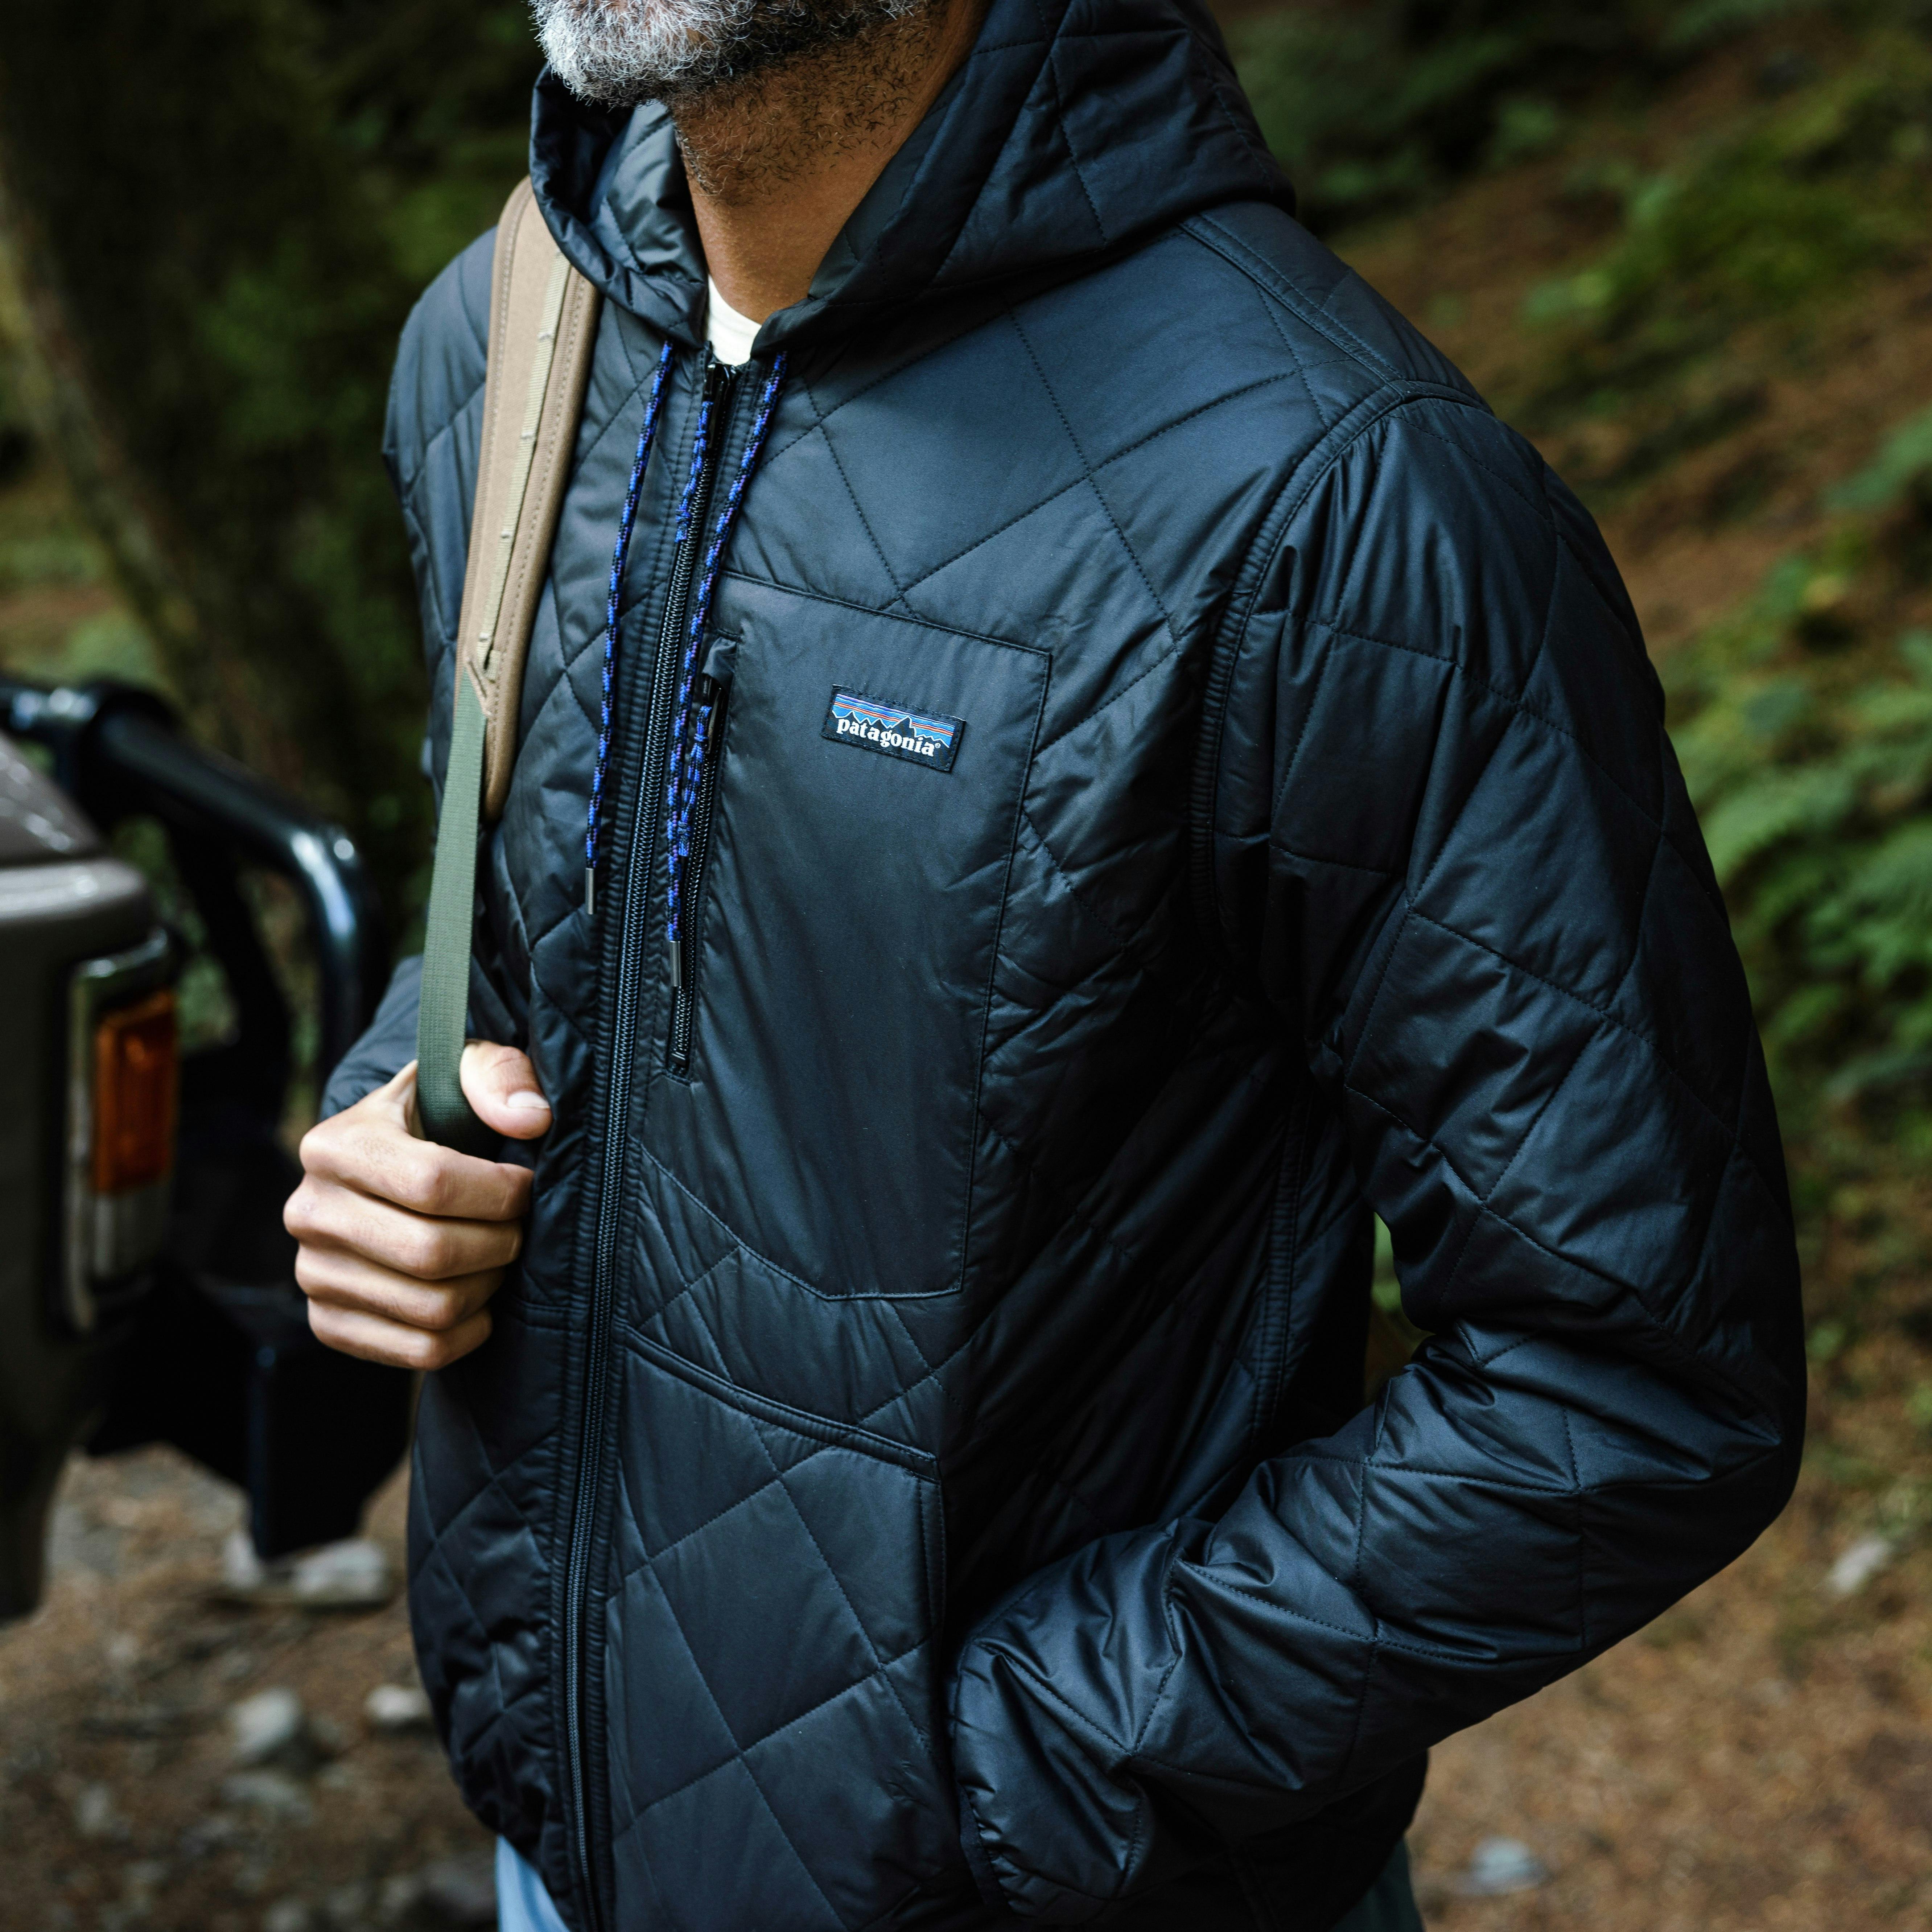 Get 30% Off Patagonia's Quilted Bomber Hoody